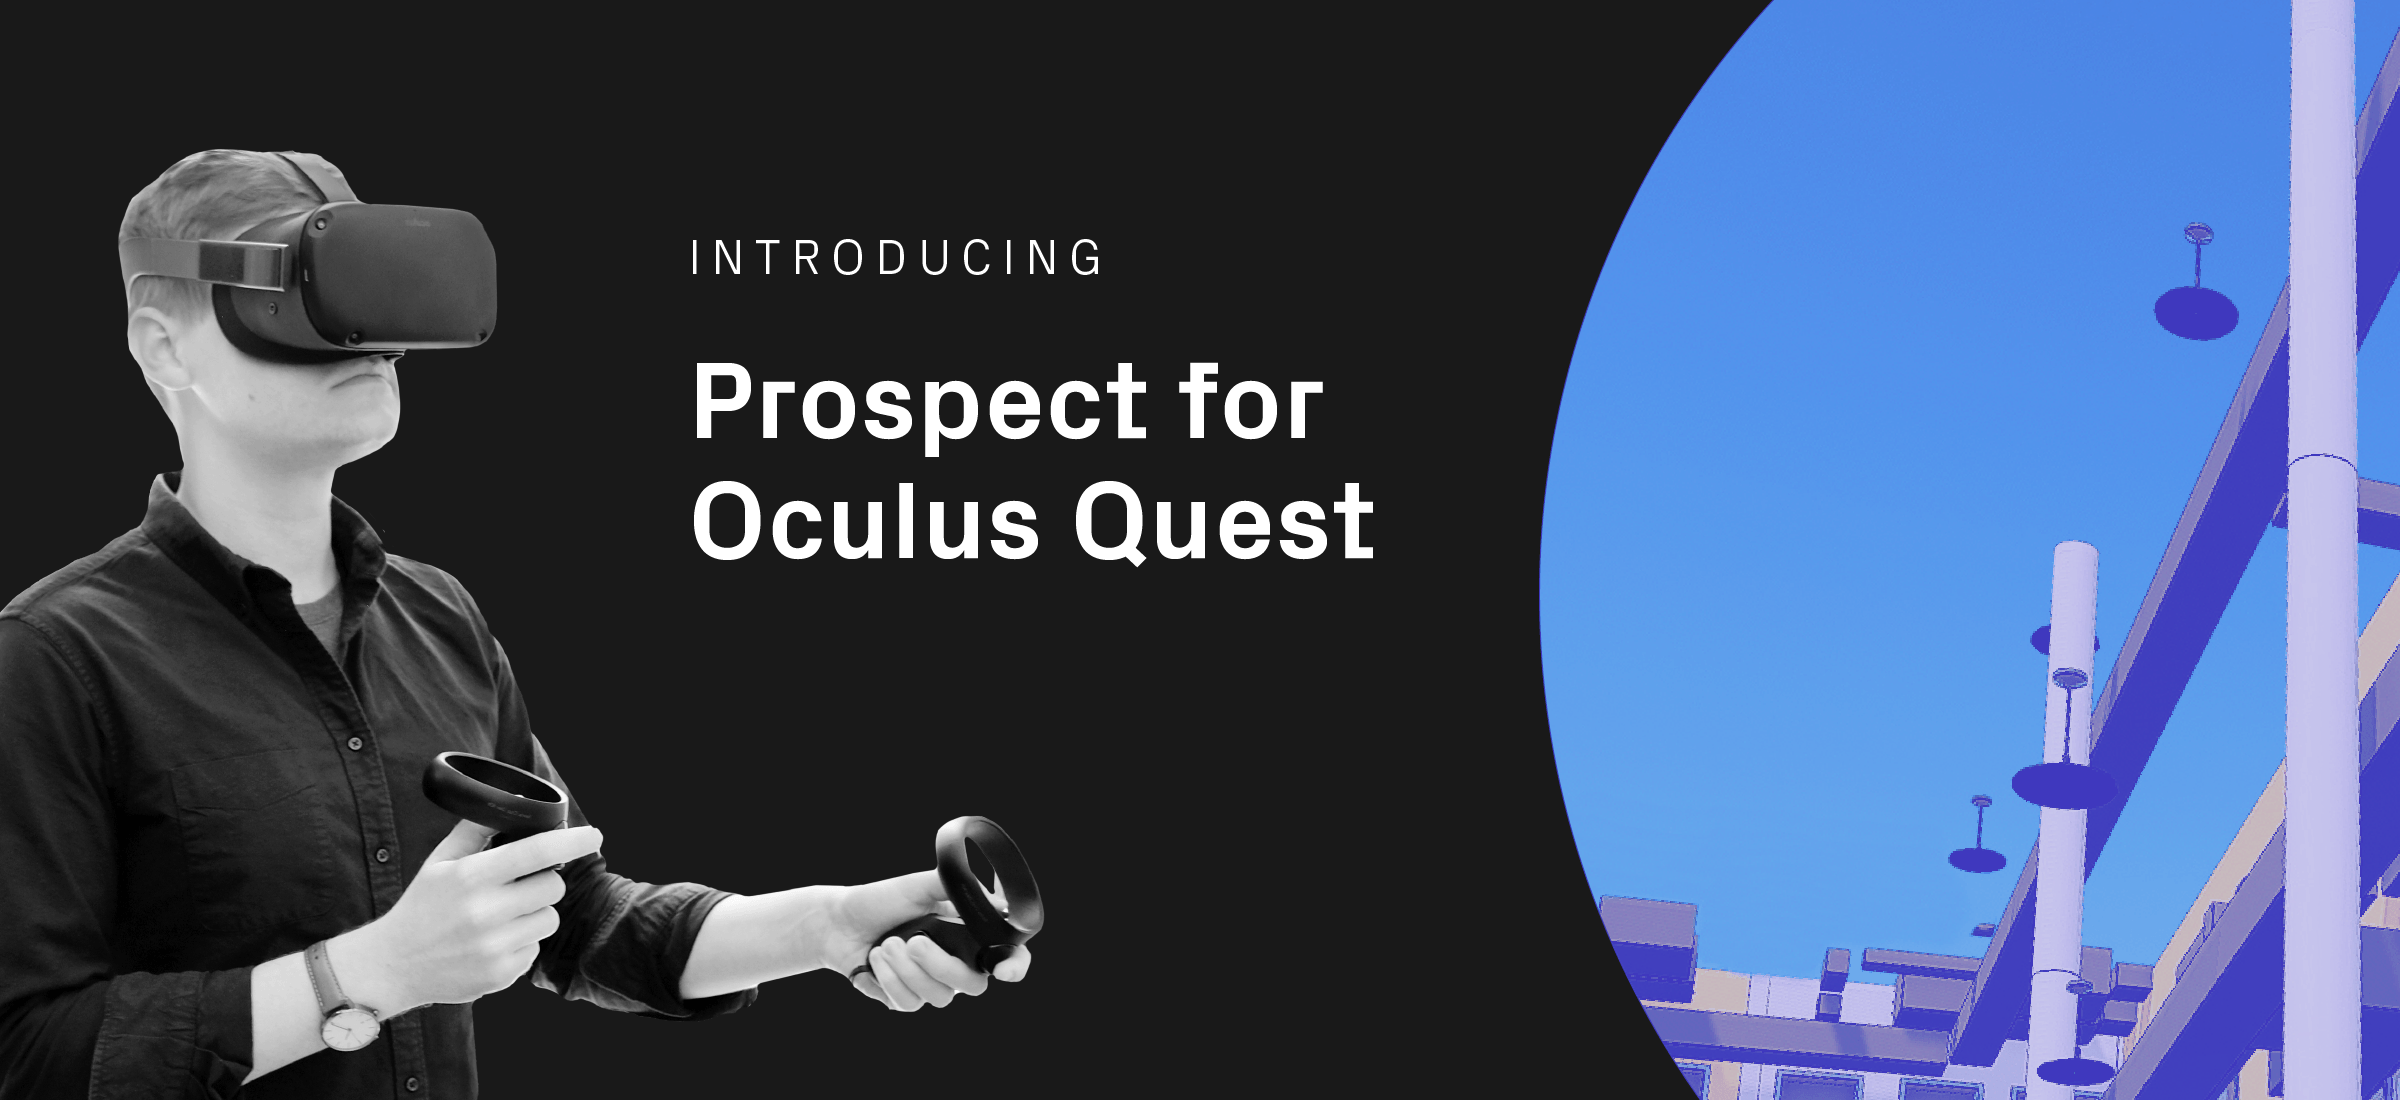 Prospect for Oculus Quest